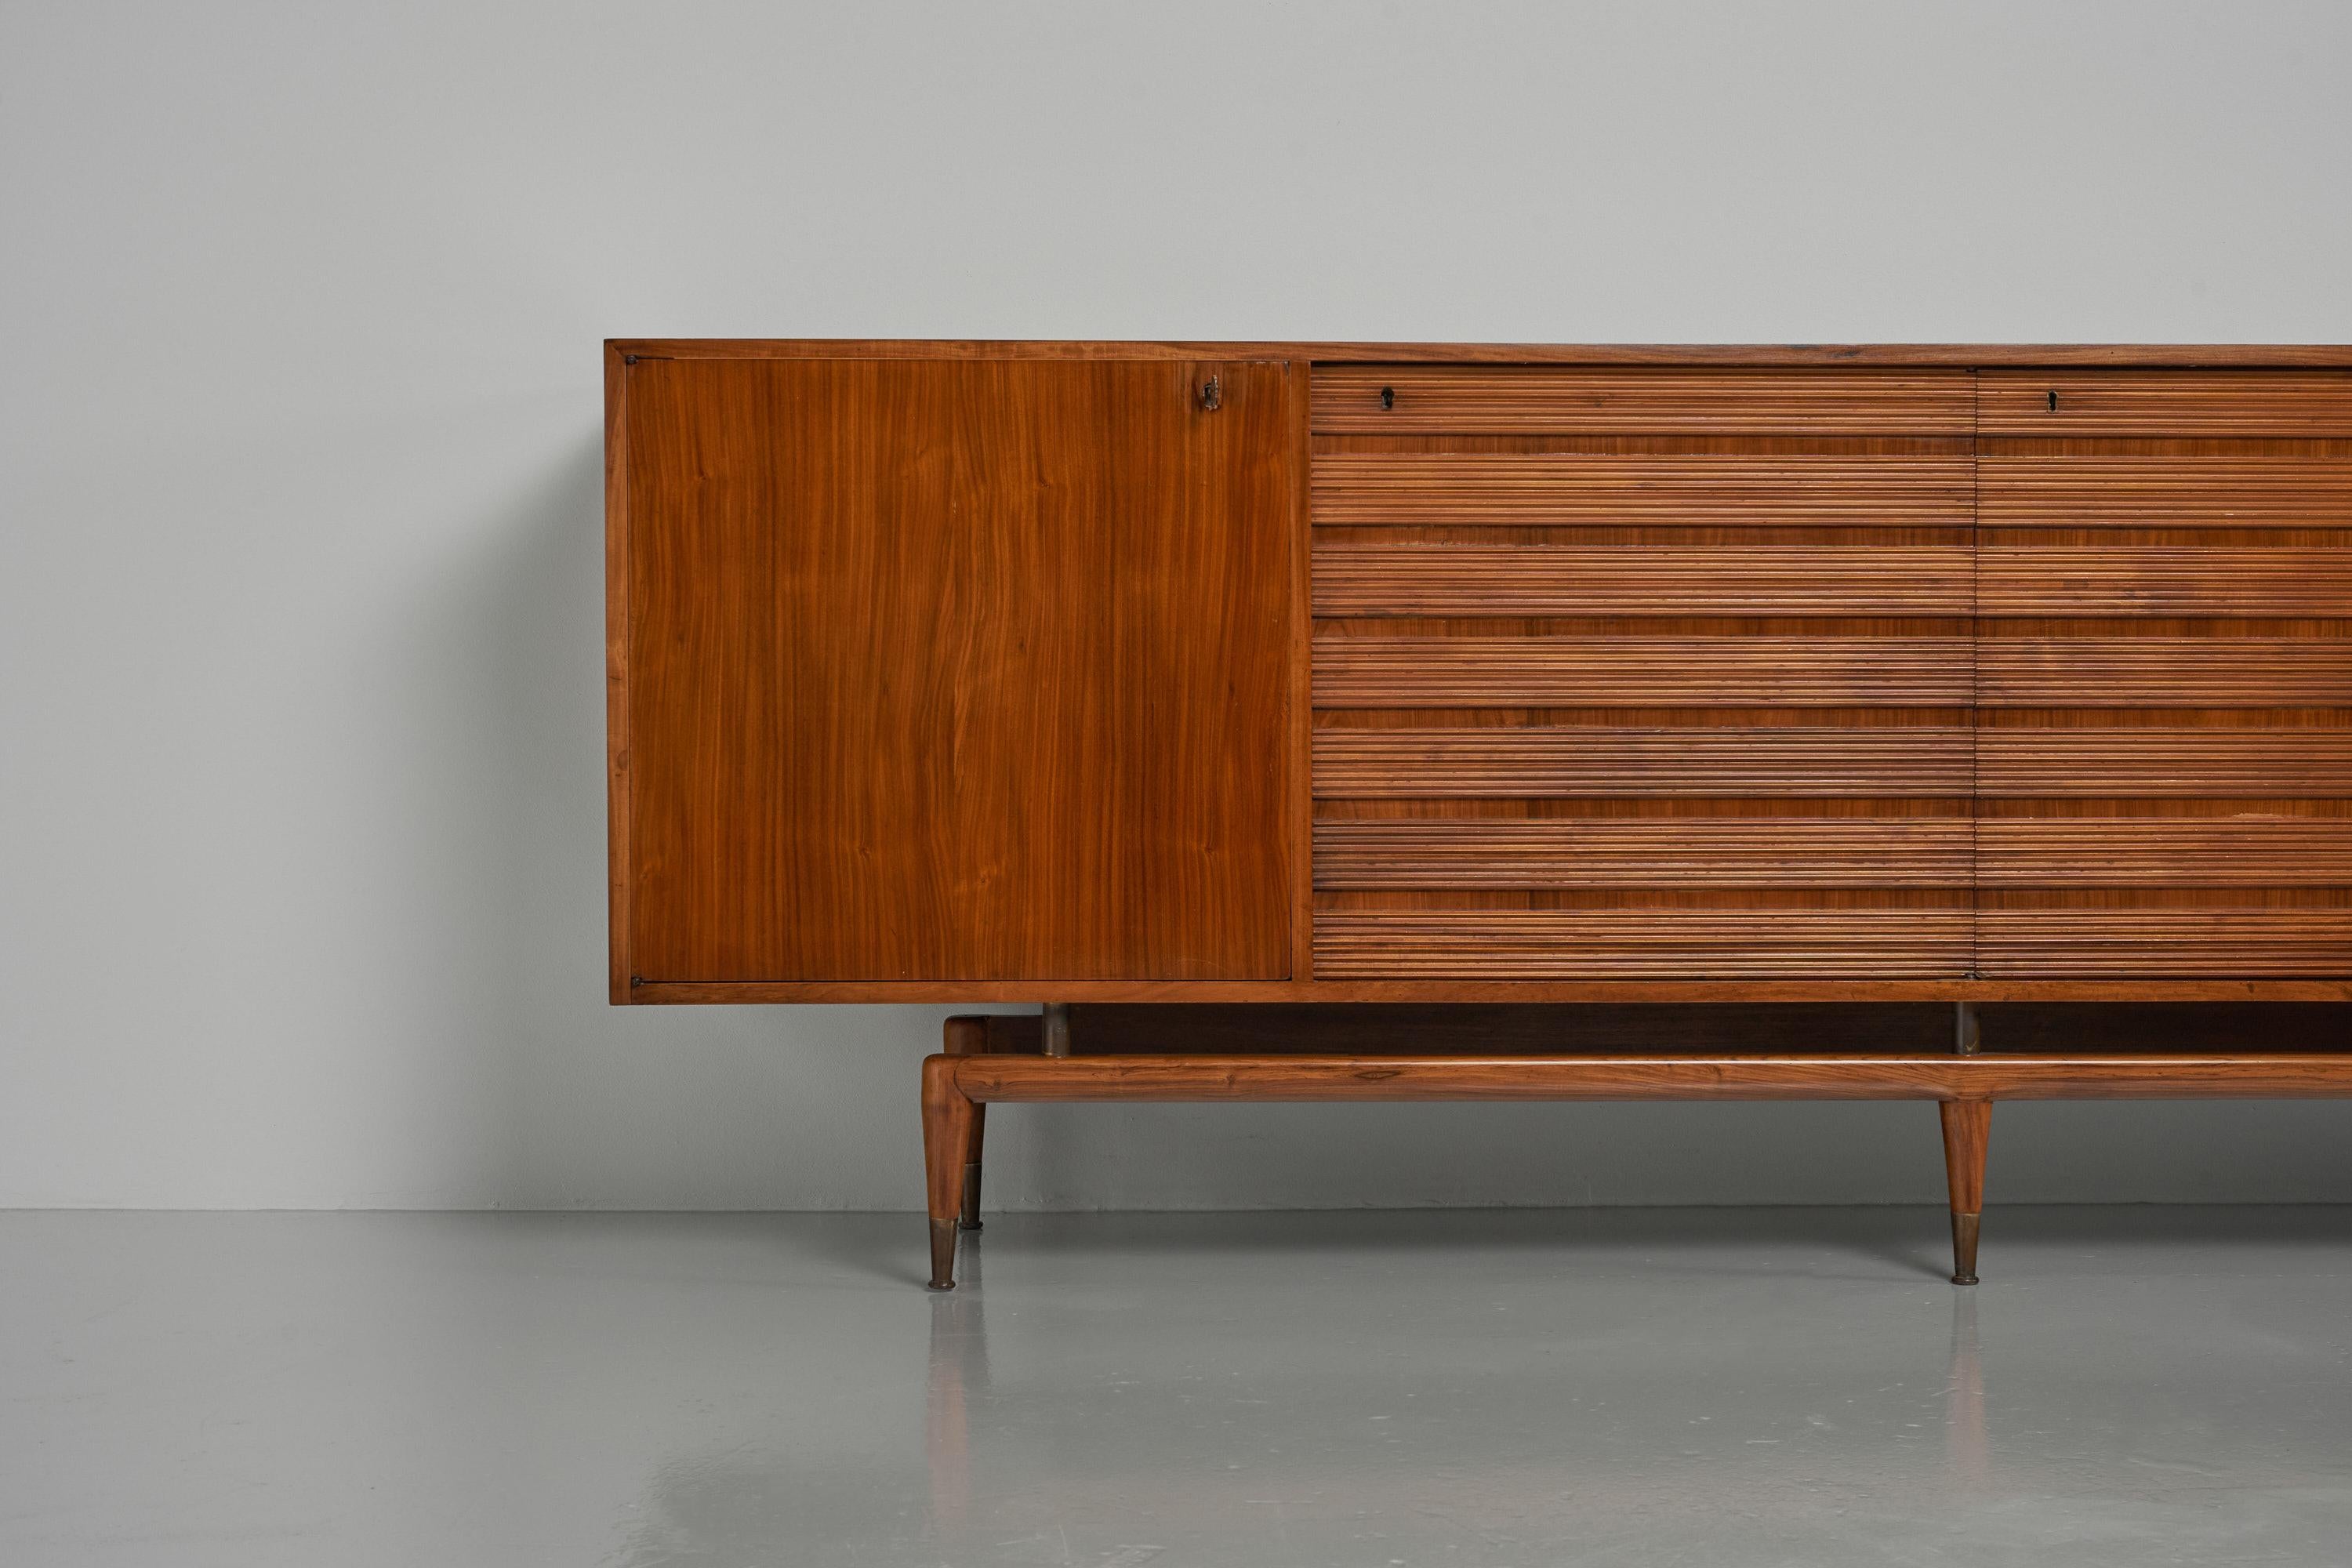 Large sized sideboard designed by Giuseppe Scapinelli and manufactured by Jacques Pedrolli, Brazil 1950. This amazing shaped sideboard has the appeal of a drawer’s cabinet, where in fact the 3 parts where you think the drawers are, are normal